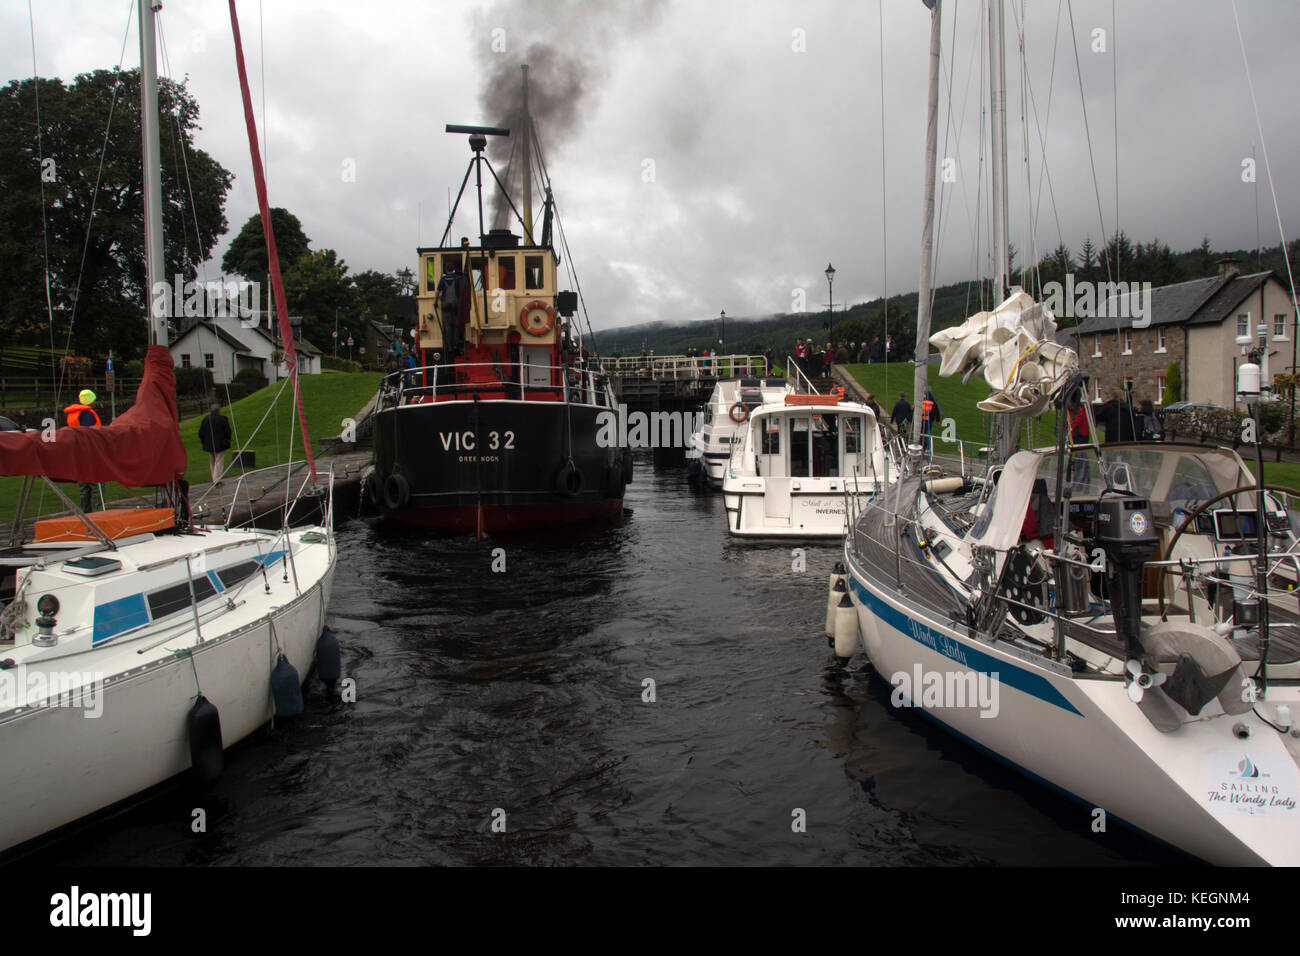 SCOTLAND; HIGHLAND;  FORT AUGUSTUS'; STEAMSHIP VIC 32 IN CALEDONIAN CANAL LOCK Stock Photo